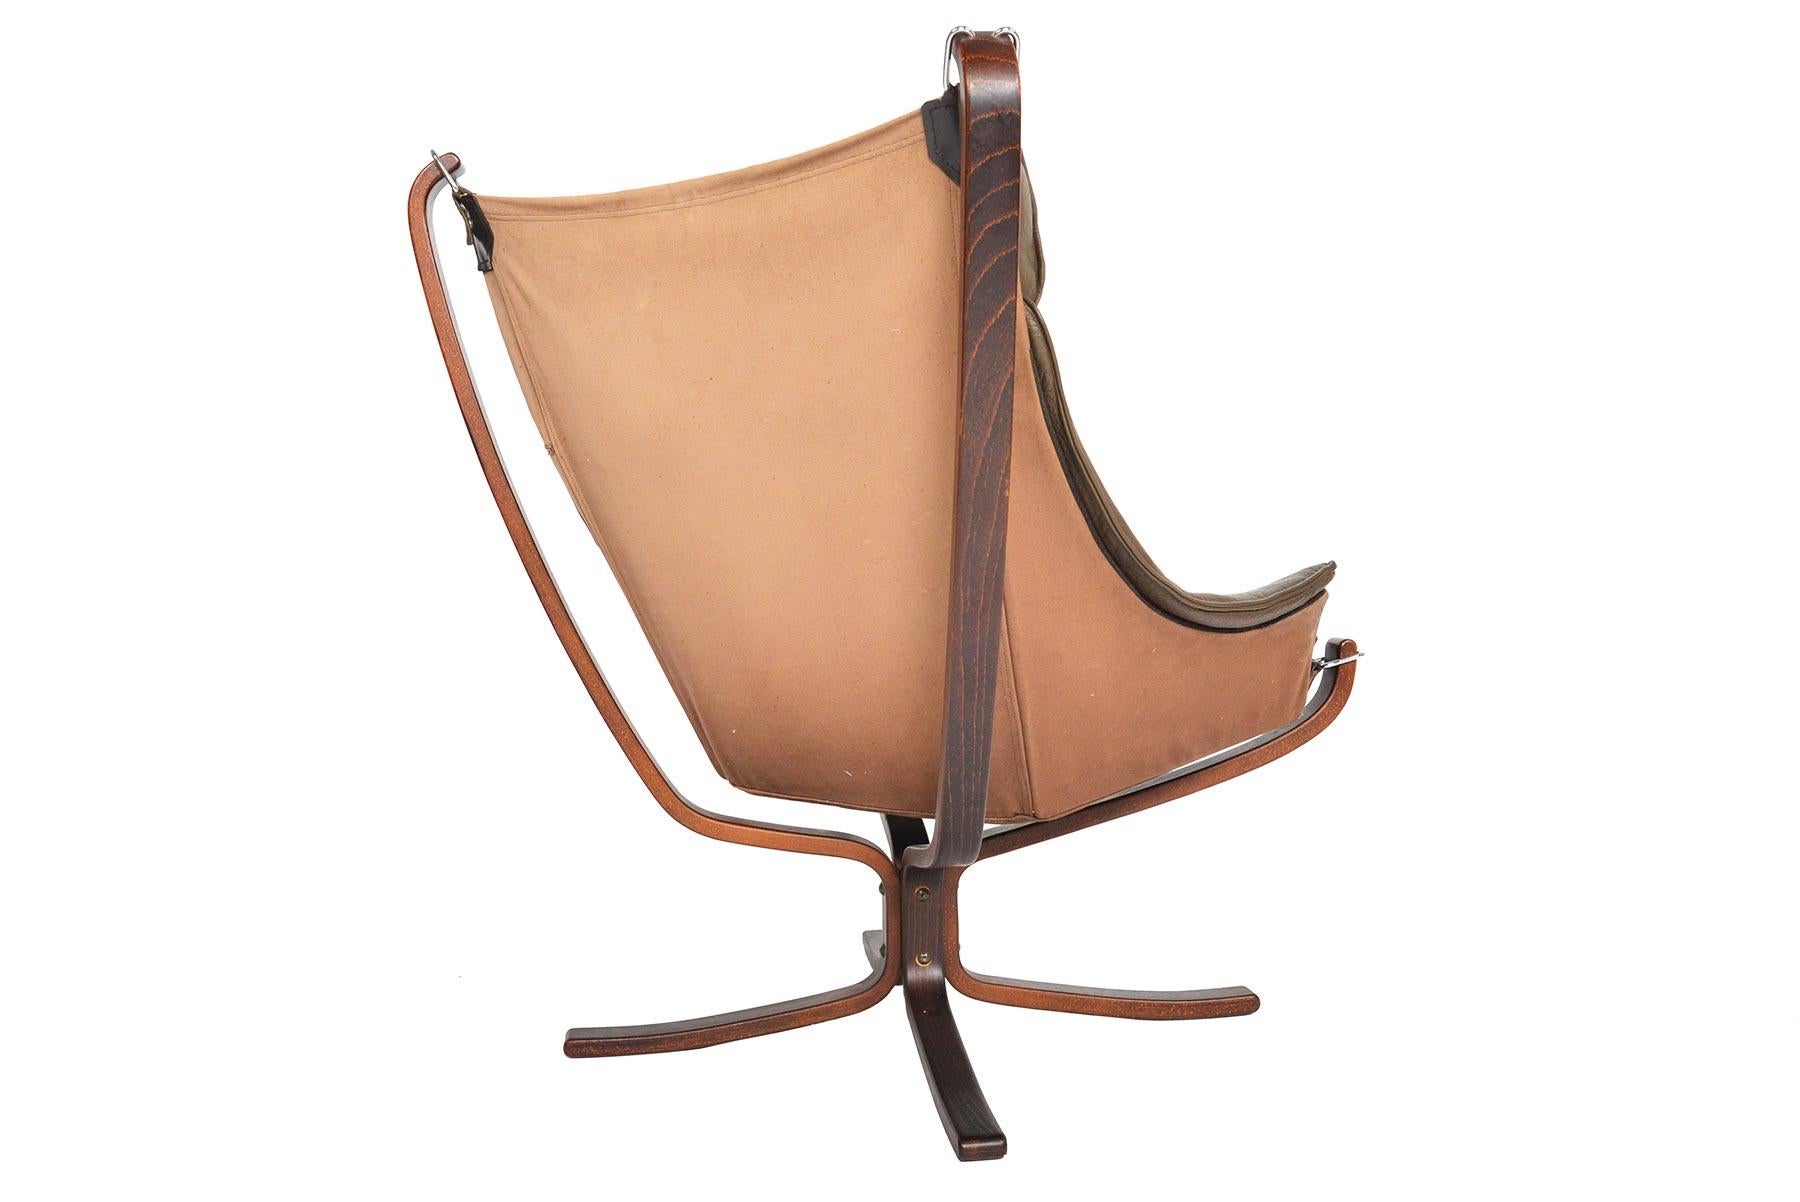 sigurd ressell falcon chair